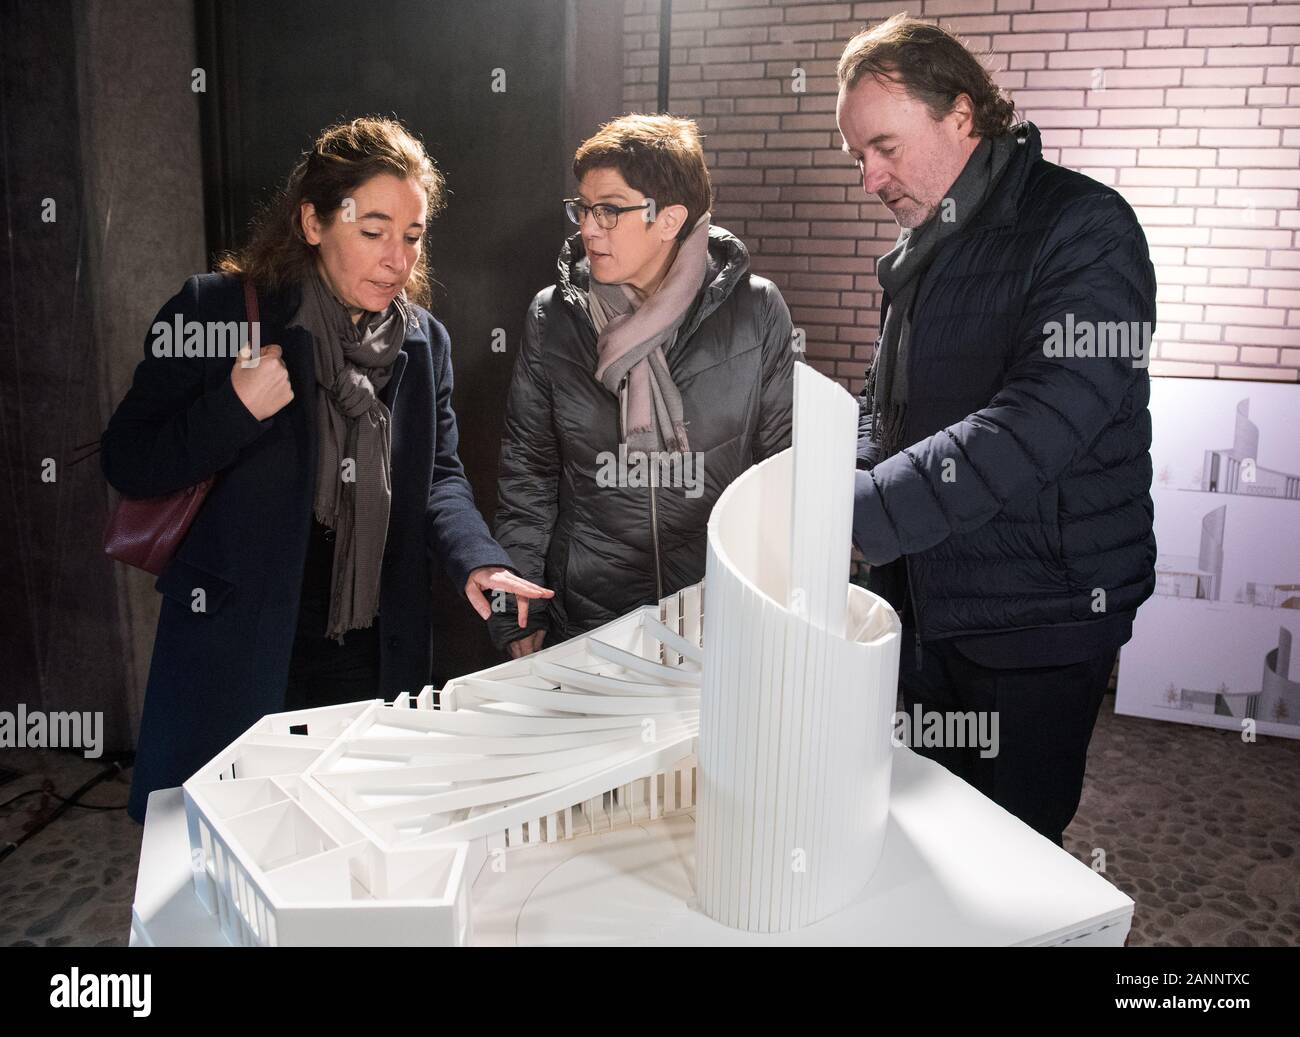 Hamburg, Germany.  18th Jan, 2020. The architects Stefanie Hillenkamp and Jo Landwehr explain a model of the construction to Annegret Kramp-Karrenbauer (CDU, M), Federal Chairwoman of the CDU and Minister of Defense, during a visit to the construction site of the Malteser Campus in the Wilhelmsburg district of the city as part of the conclusion of the CDU Executive Board's annual meeting at the beginning of the year. Credit: Daniel Bockwoldt/dpa/Alamy Live News Stock Photo